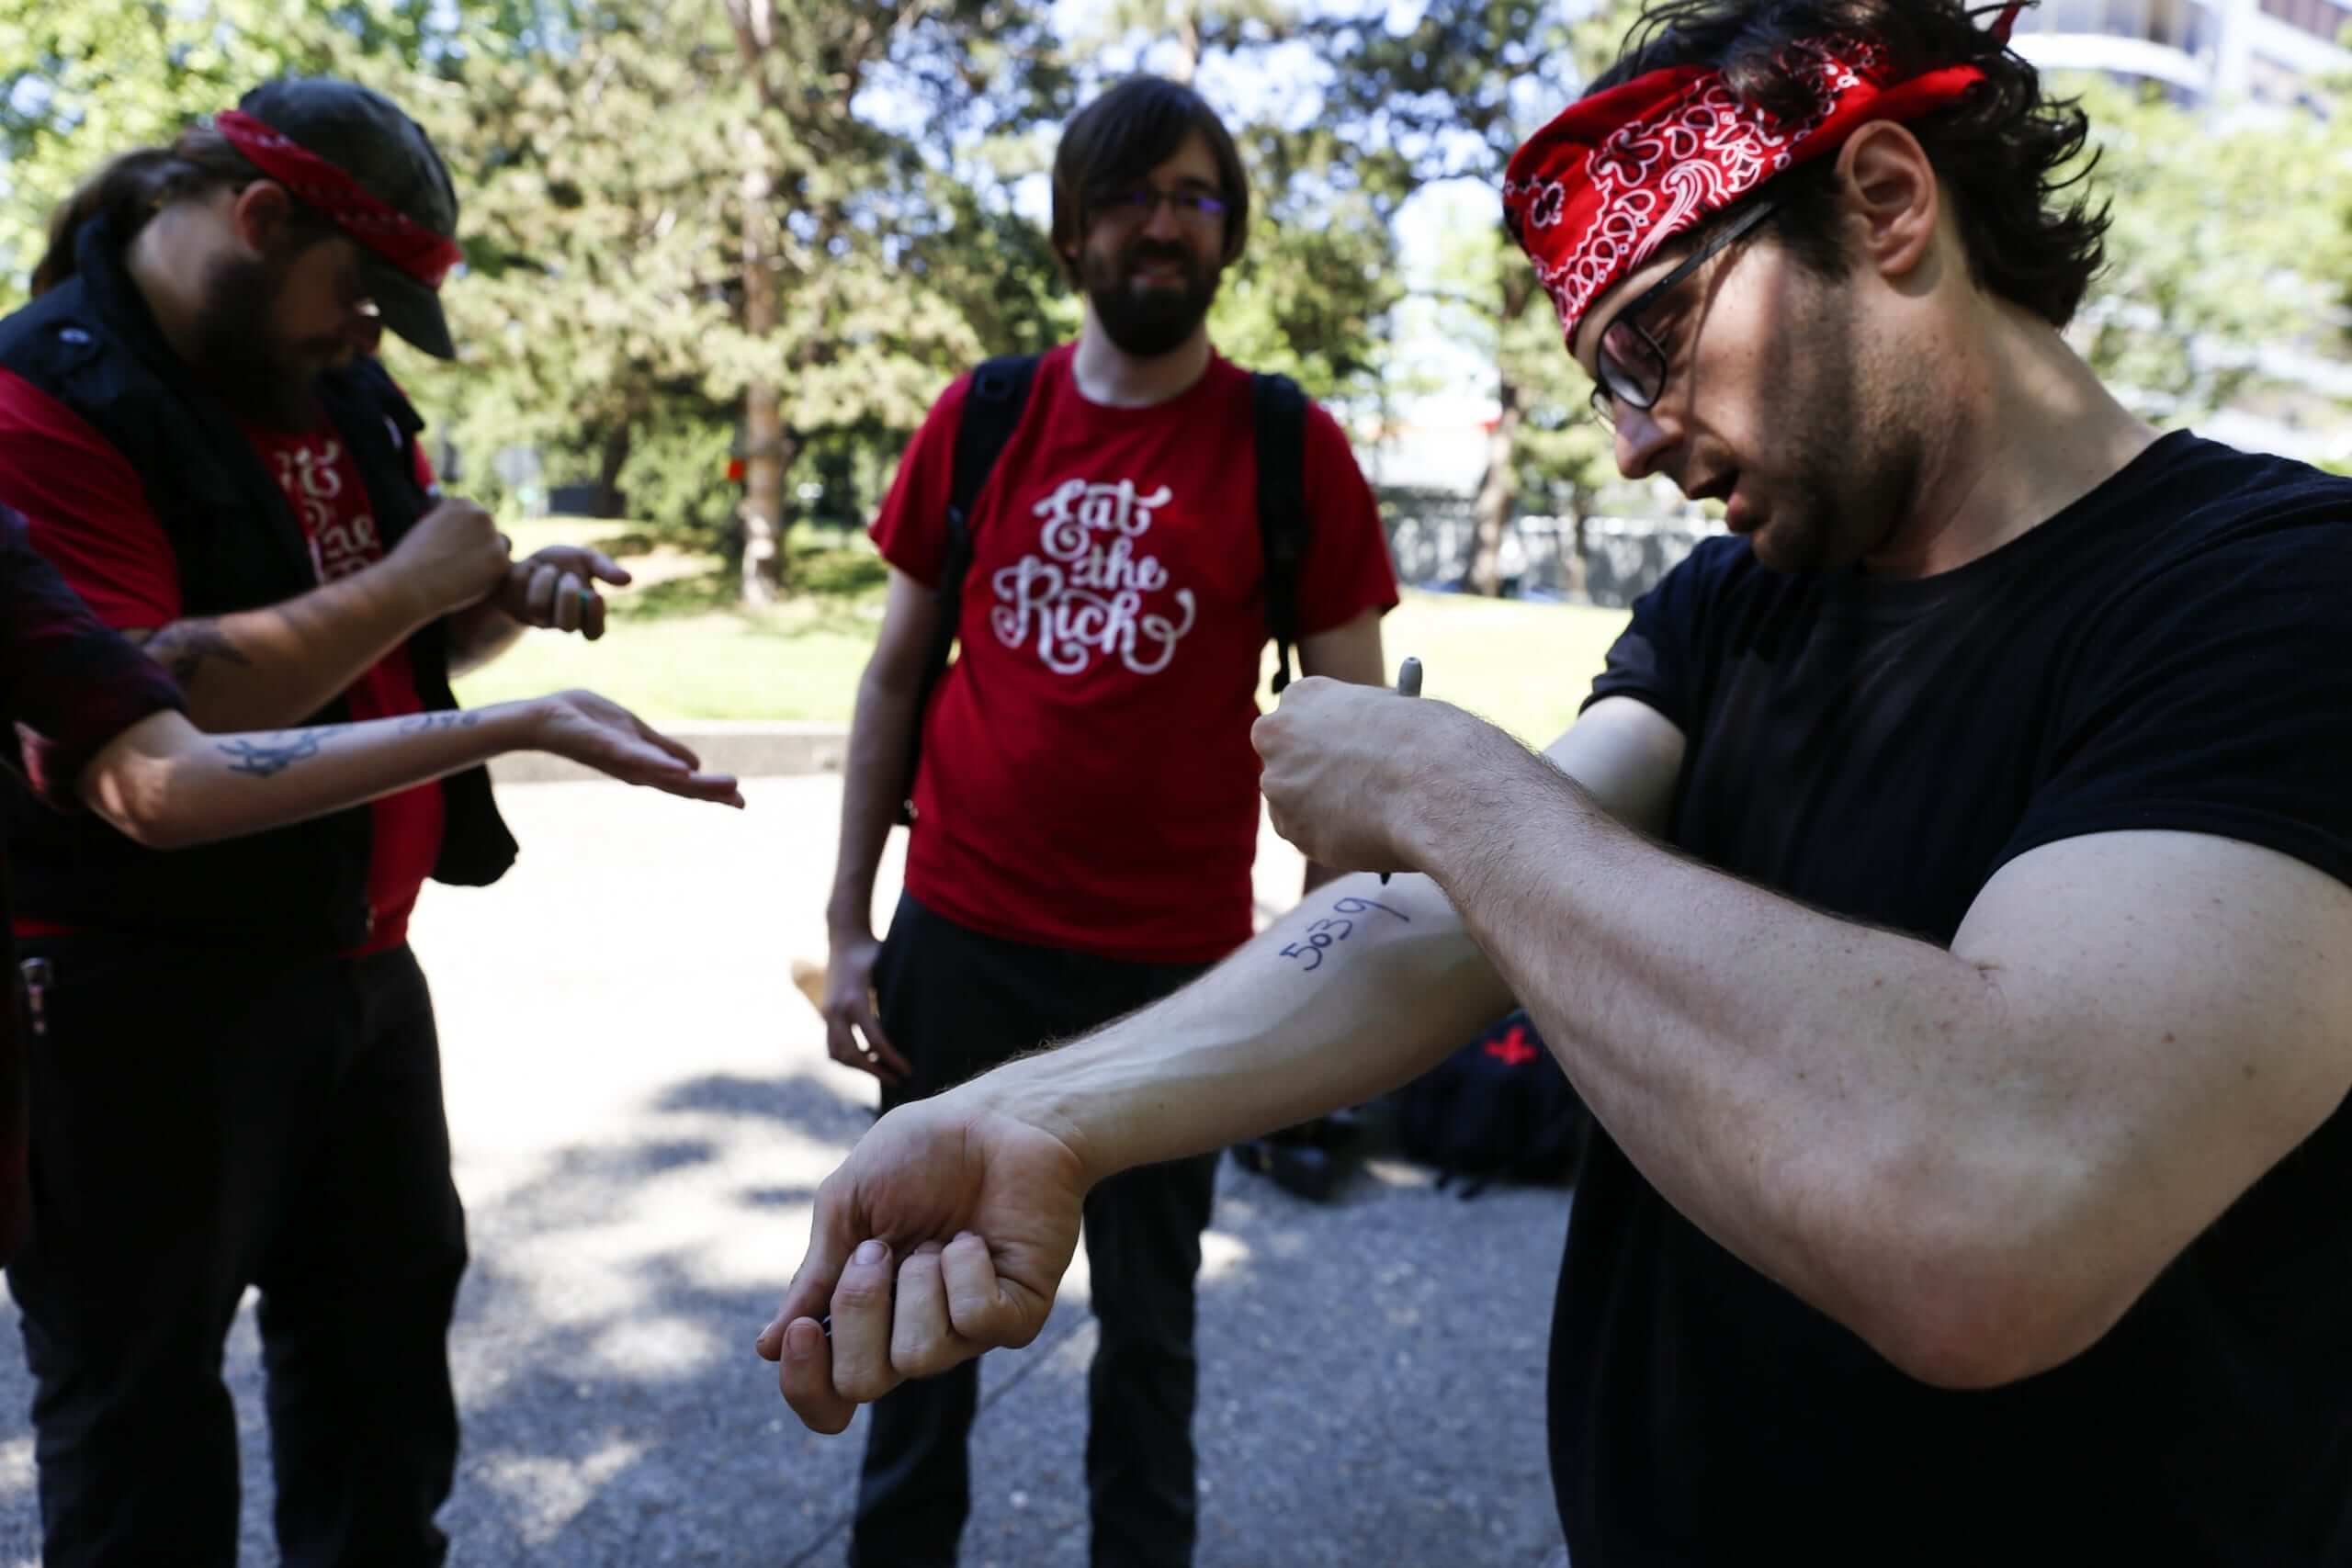 PORTLAND, OR - JUNE 29: Democratic Socialists of America, or DSA, members write the phone number of the National Lawyers Guild in case they get injured during a Portland demonstration between the right and left on June 29, 2019 in Portland, Oregon. Several groups from the left and right clashed after competing demonstrations at Pioneer Square, Chapman Square, and Waterfront Park spilled into the streets. According to police, medics treated eight people and three people were arrested during the demonstrations.